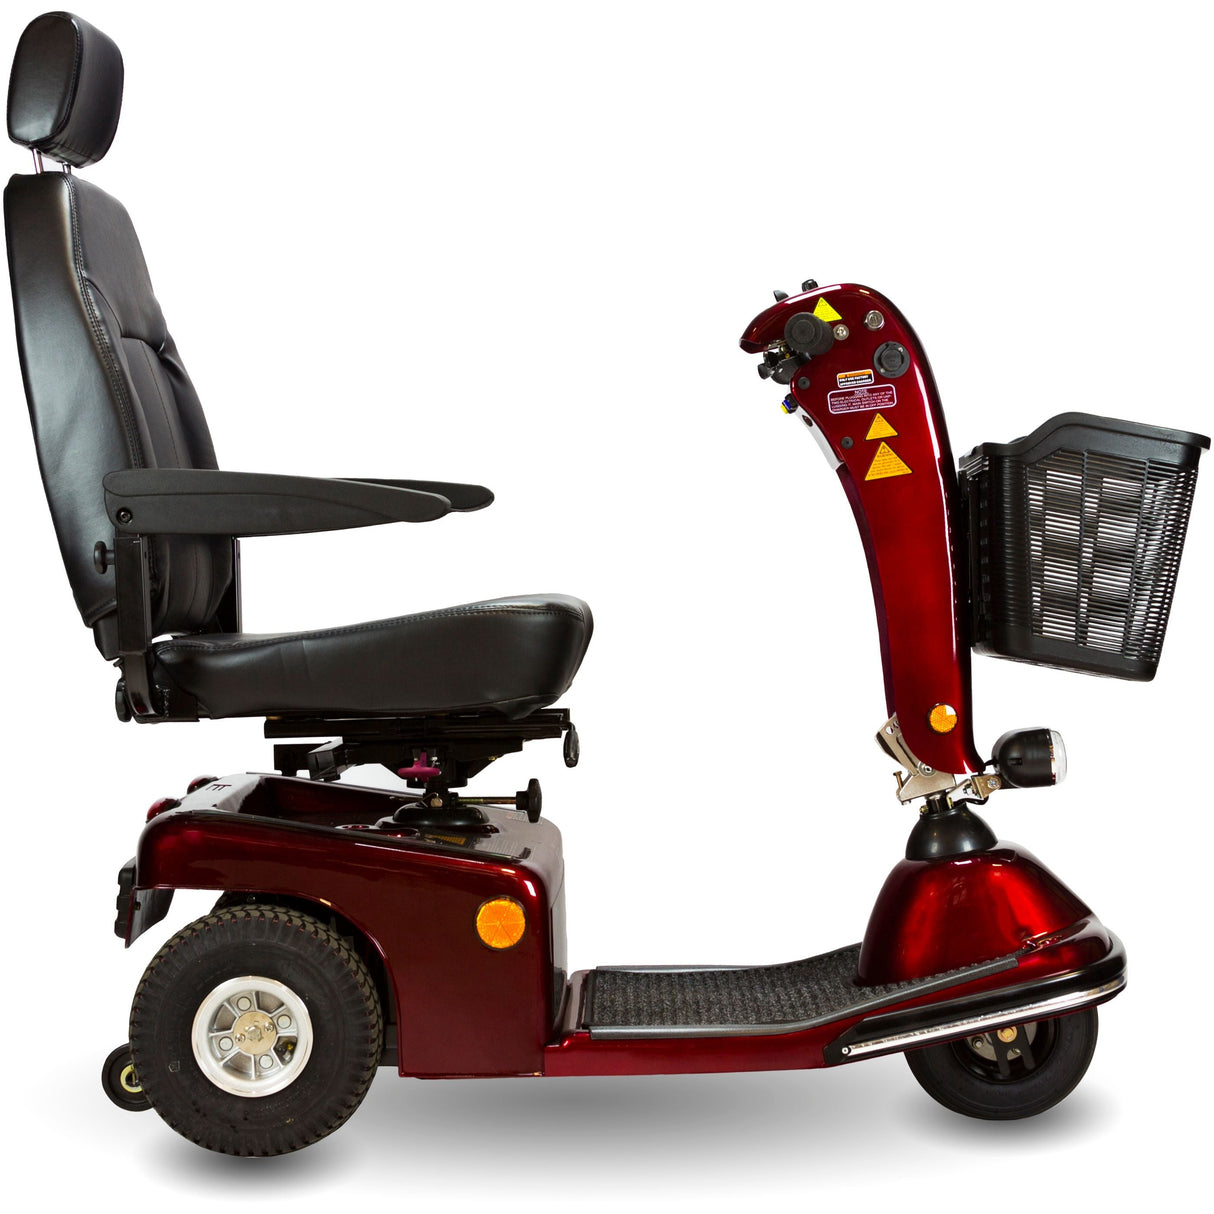 Shoprider® Sunrunner™ 4 Mobility Scooter